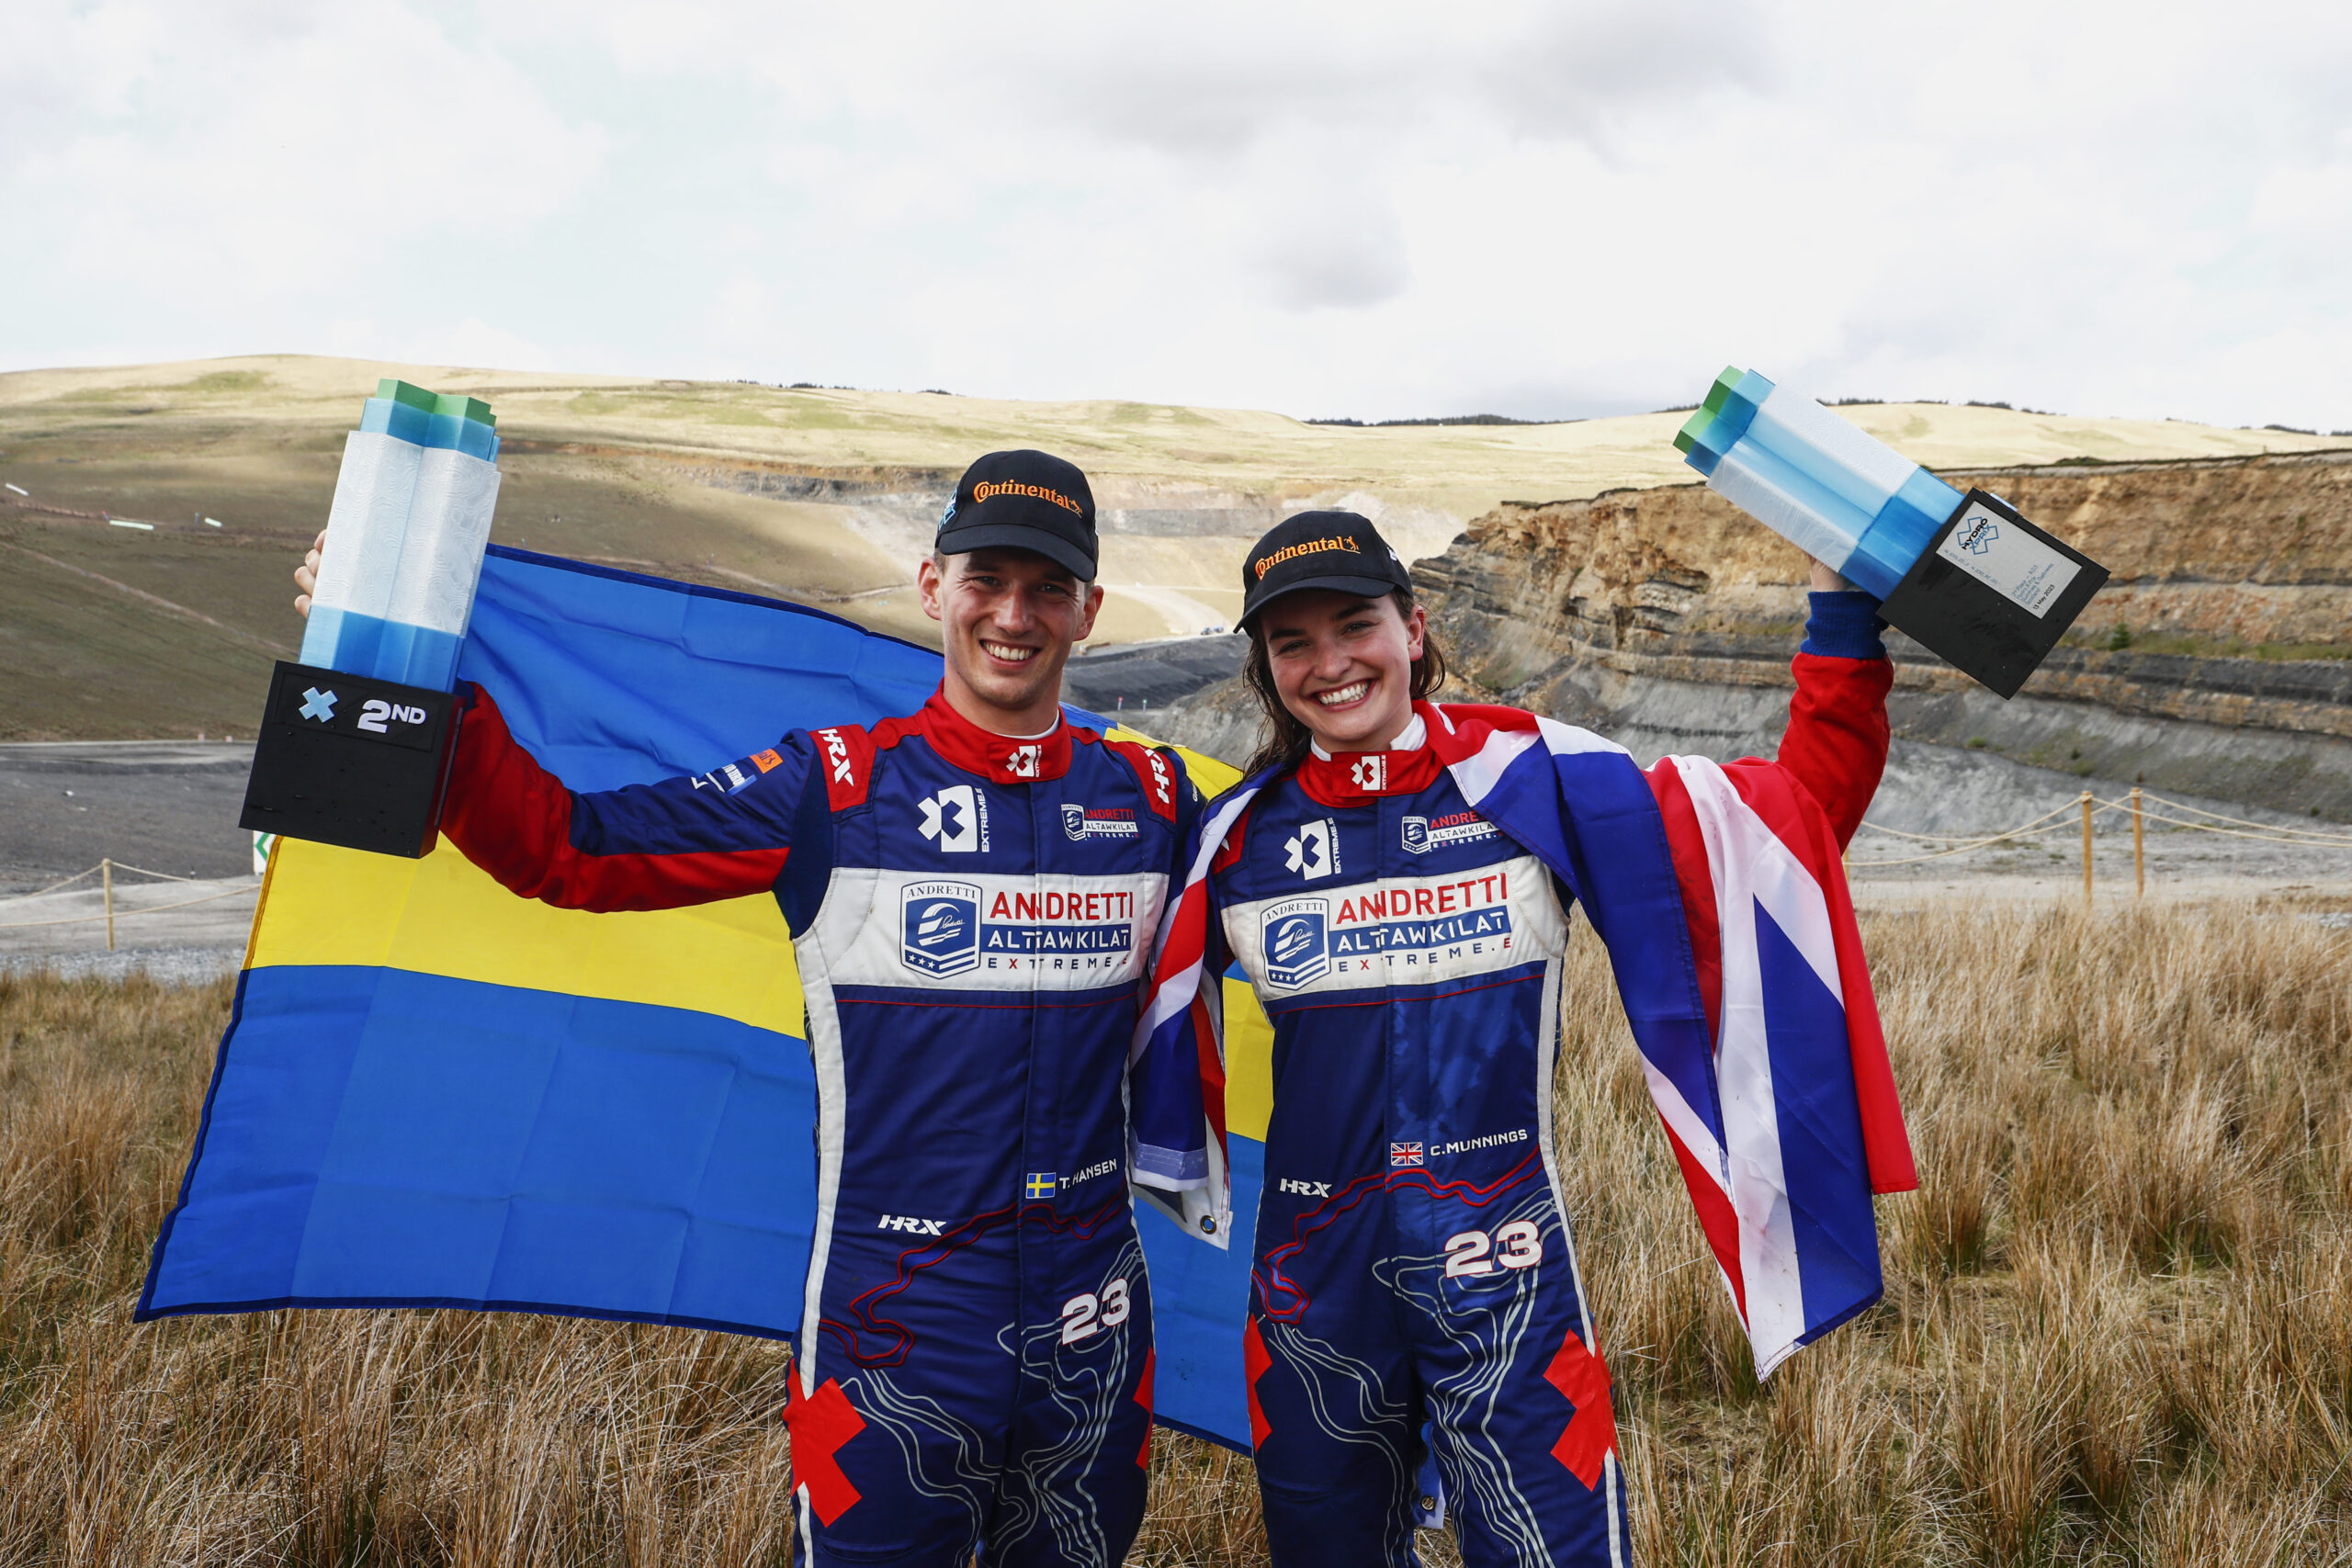 Andretti Altawkilat Extreme E retains Catie Munnings and Timmy Hansen for Season 4